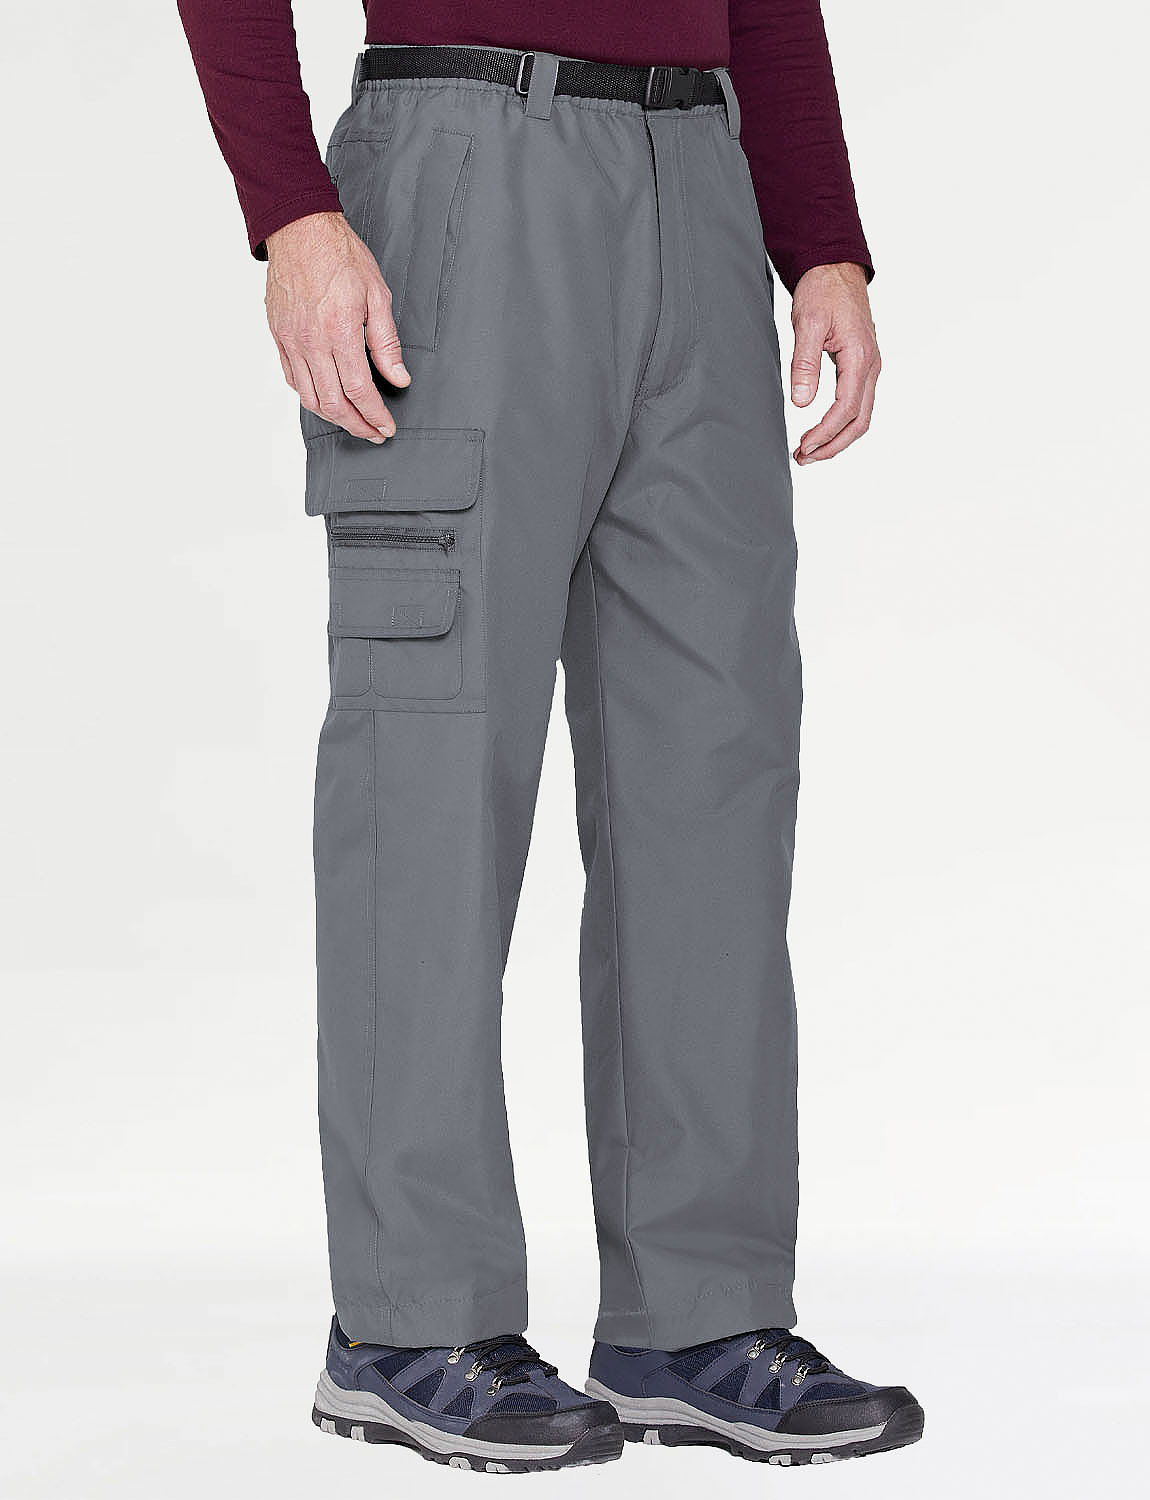 Pegasus Fleece Lined Waterproof Action Trouser With Belt | Chums